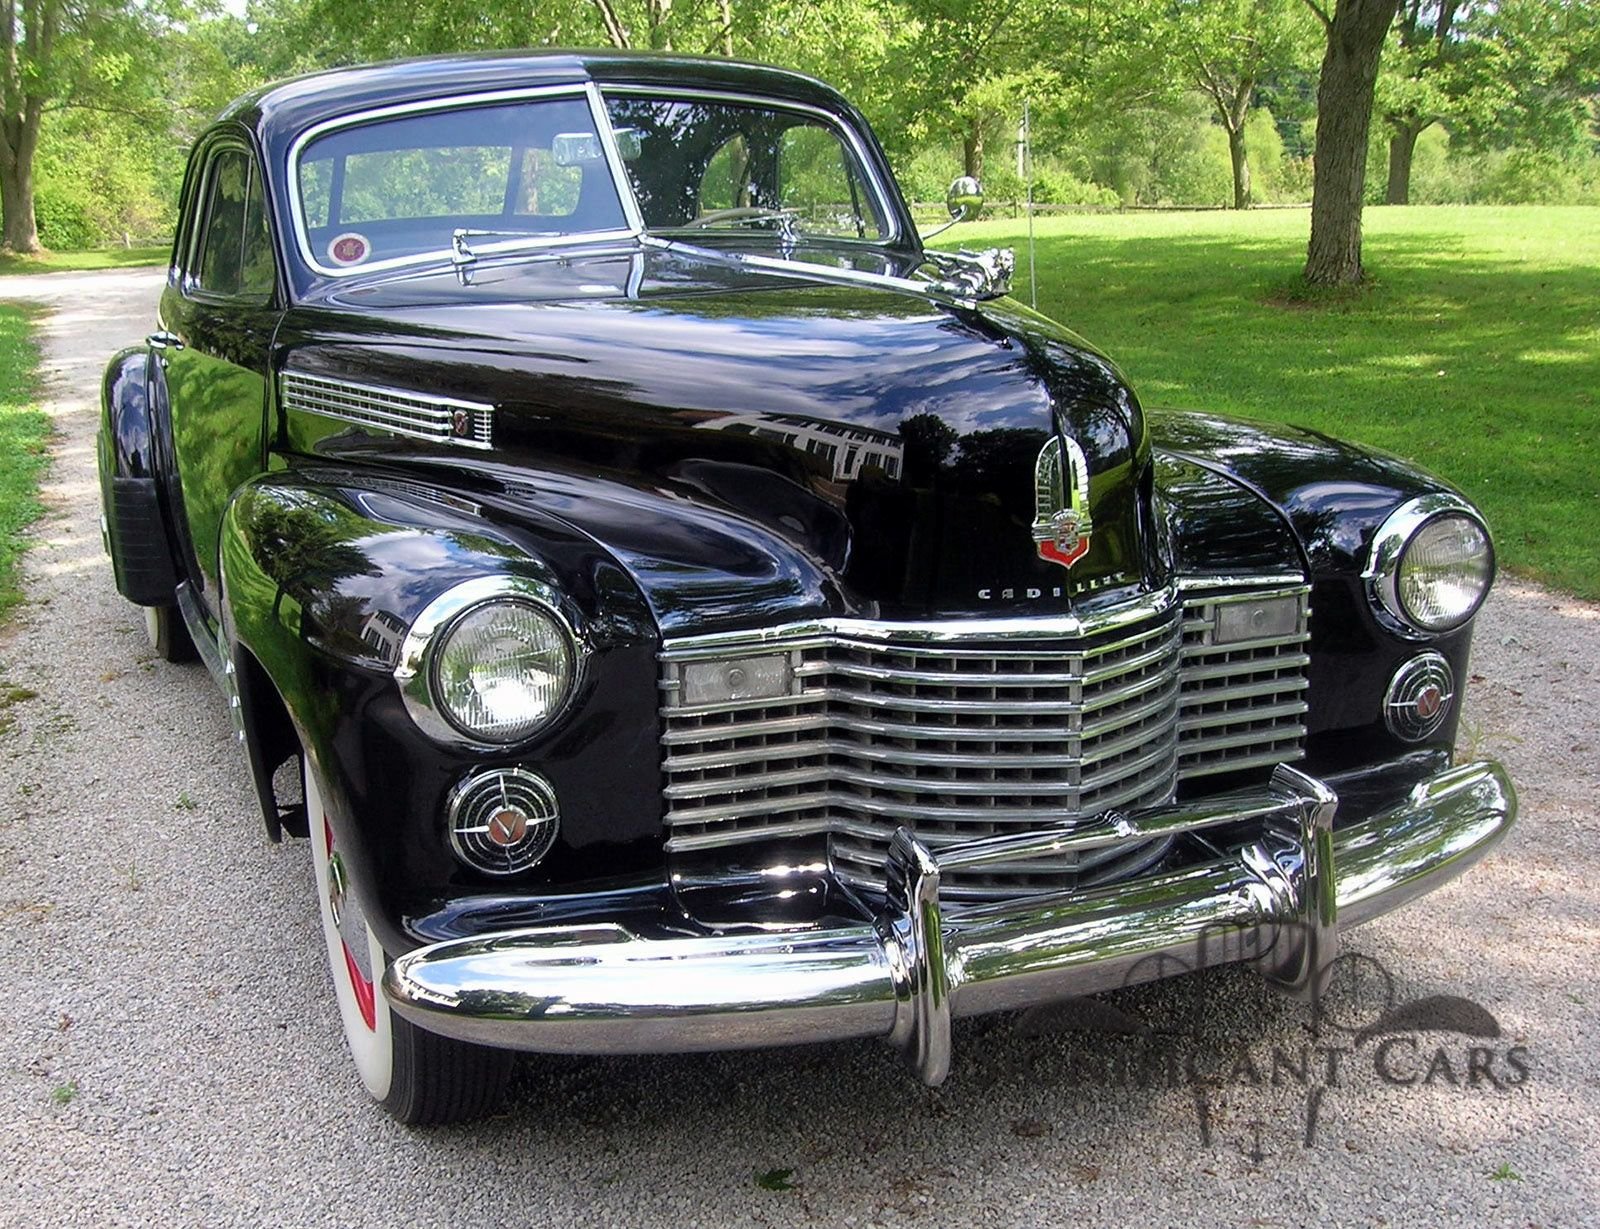 1941 Cadillac 62 Deluxe Coupe